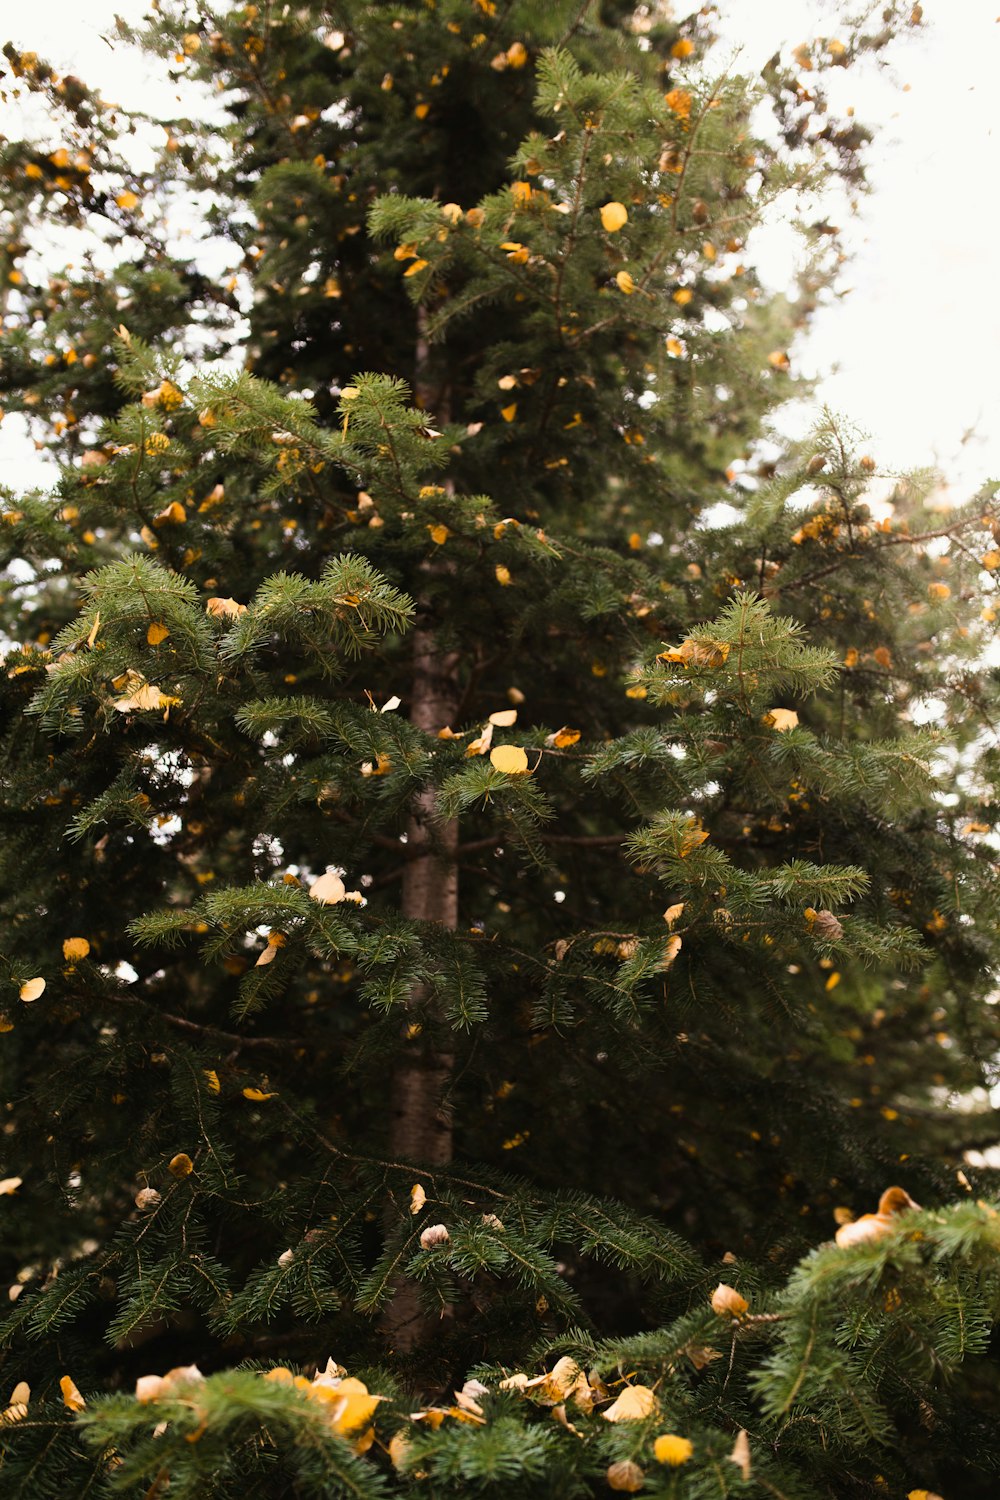 a very tall tree with lots of yellow flowers on it